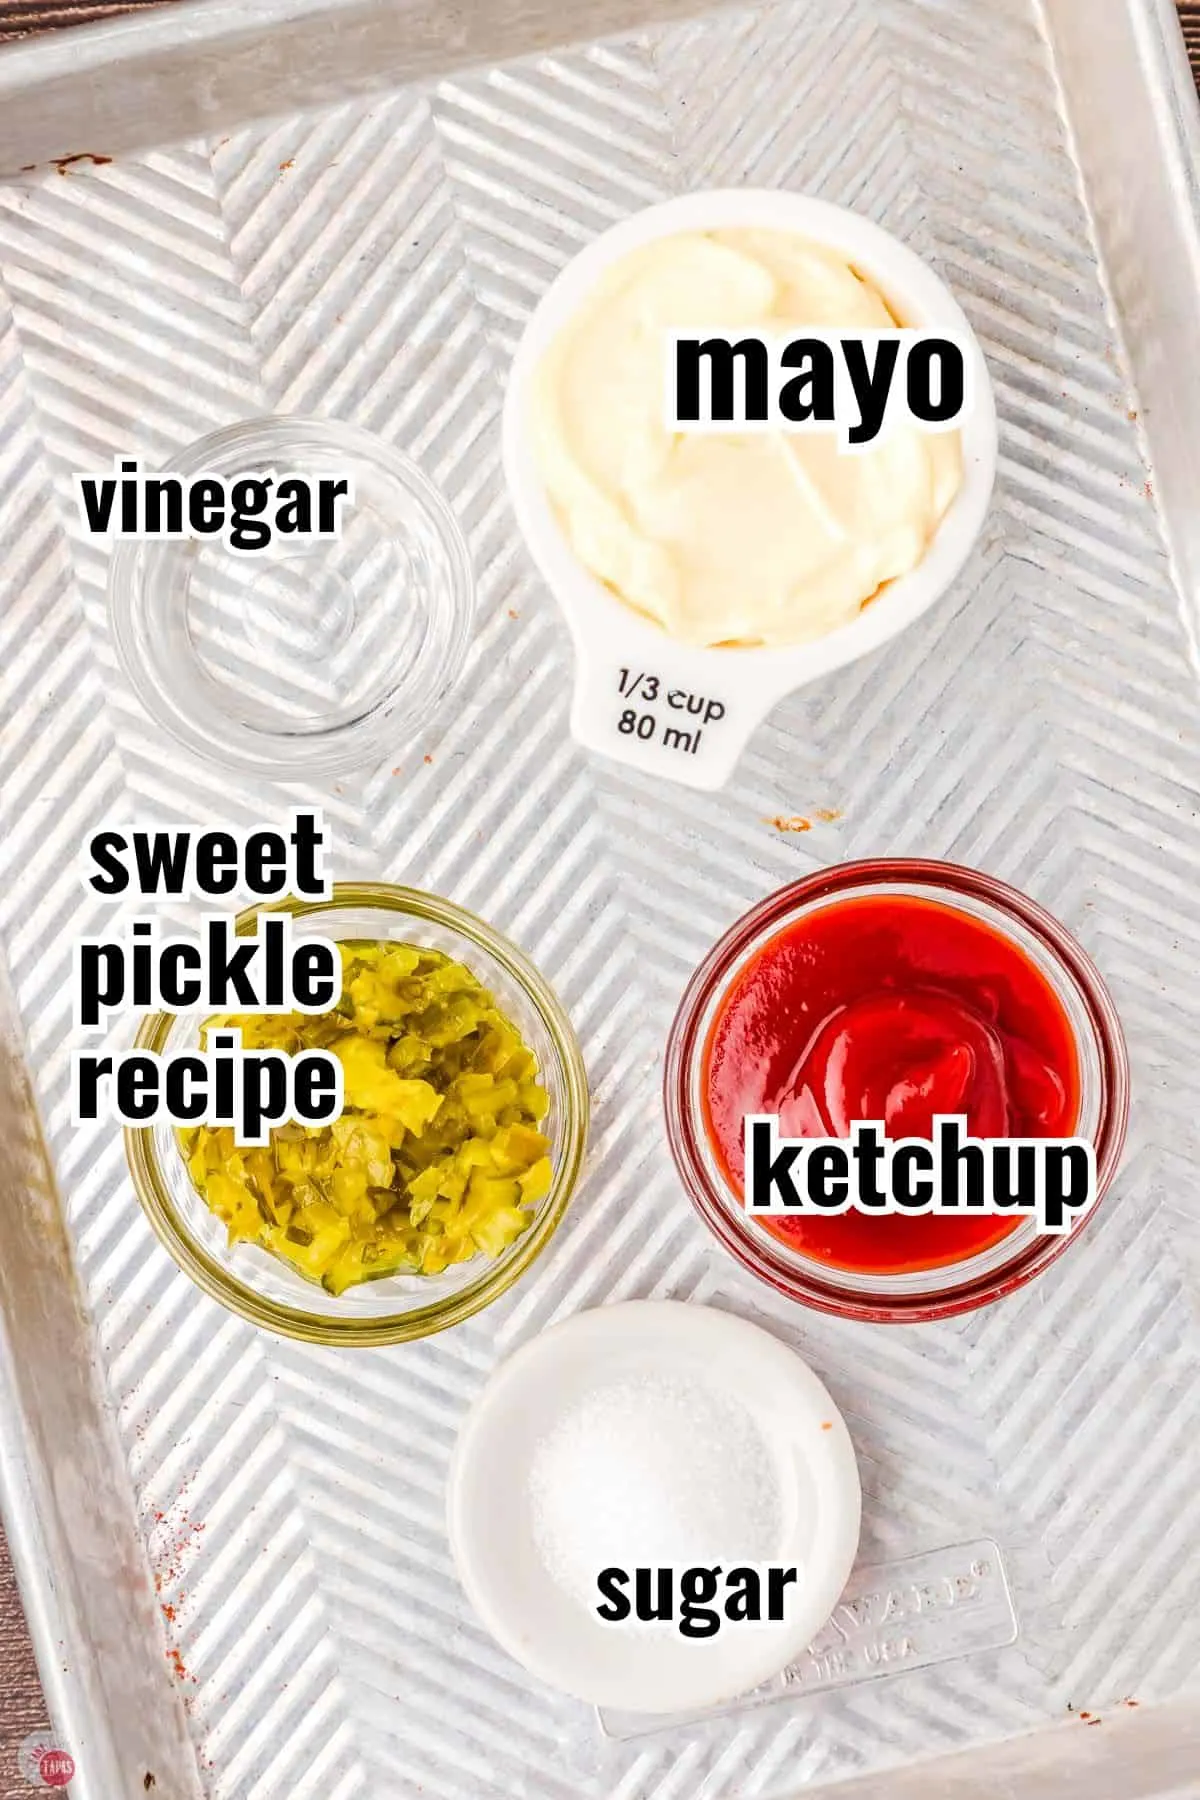 simple ingredients make this delicious sauce